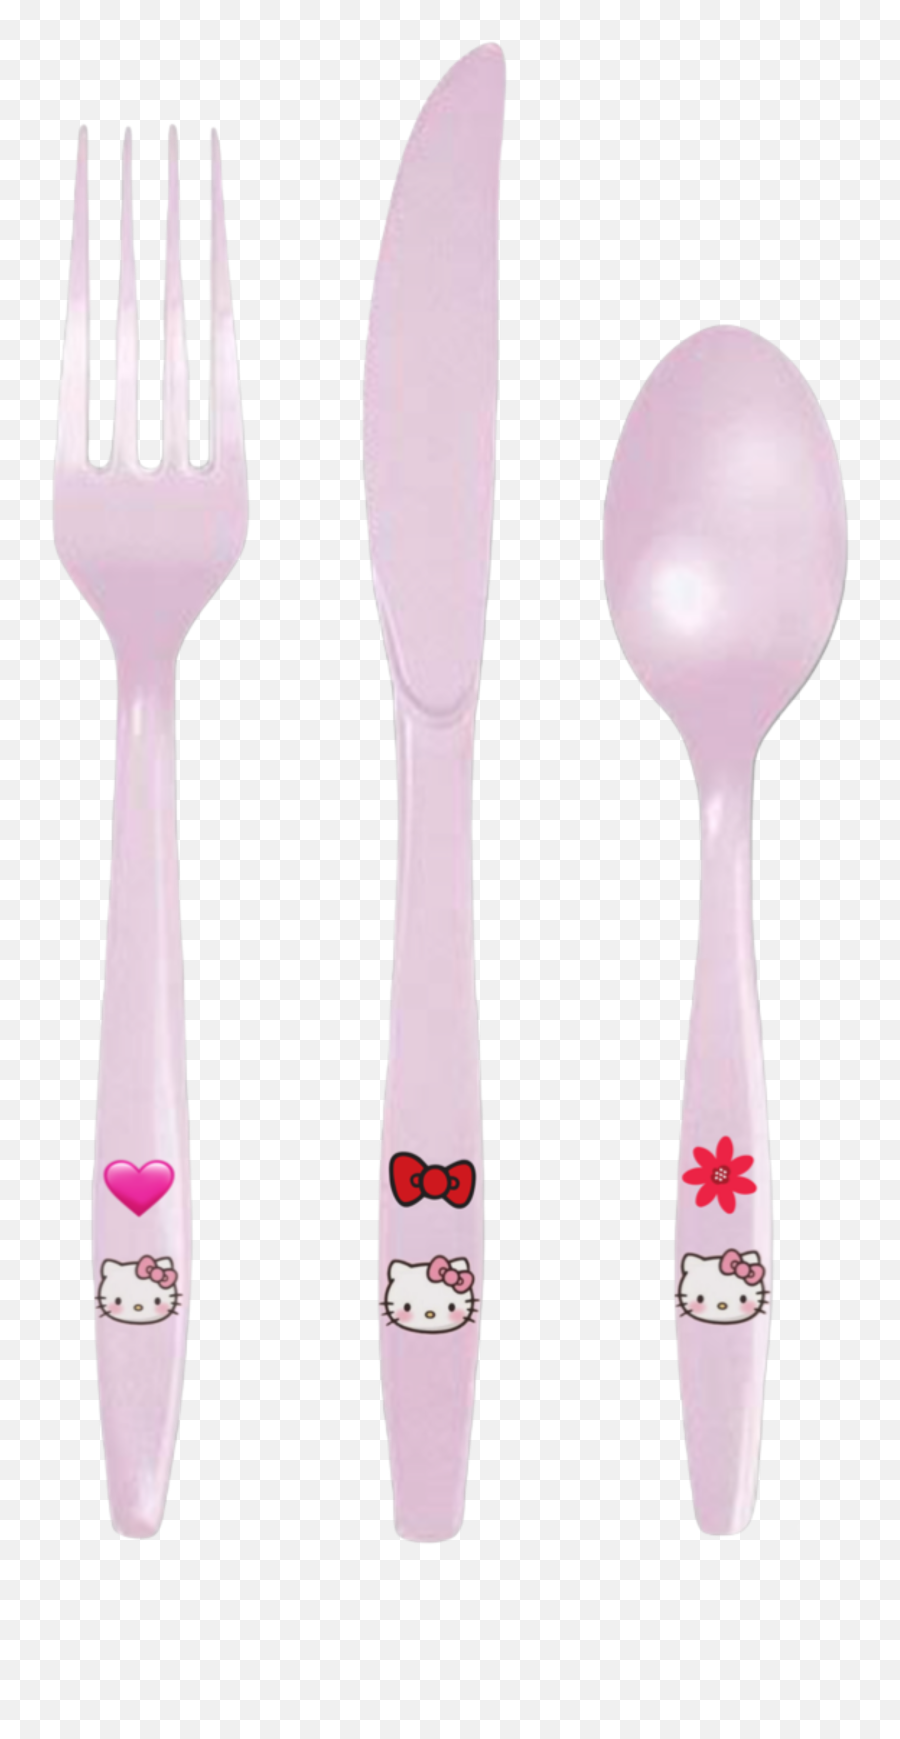 The Most Edited Ping Picsart Emoji,Fork And Spoon And Knife Emojis